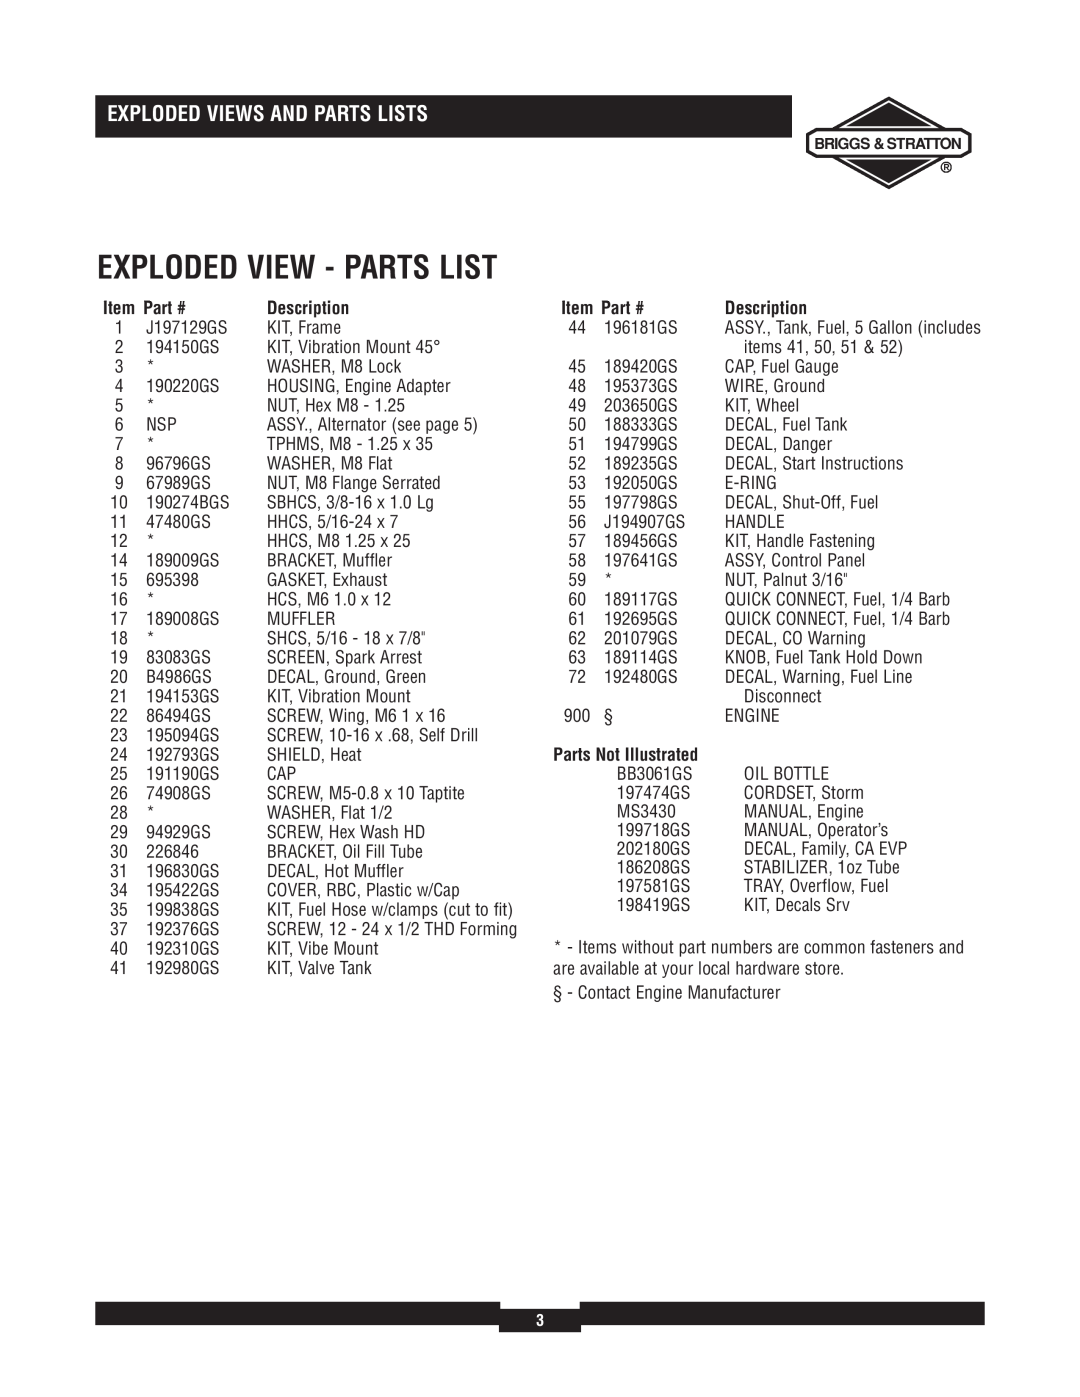 Briggs & Stratton 30324 Exploded View - Parts List, Exploded Views And Parts Lists, Description, Parts Not Illustrated 